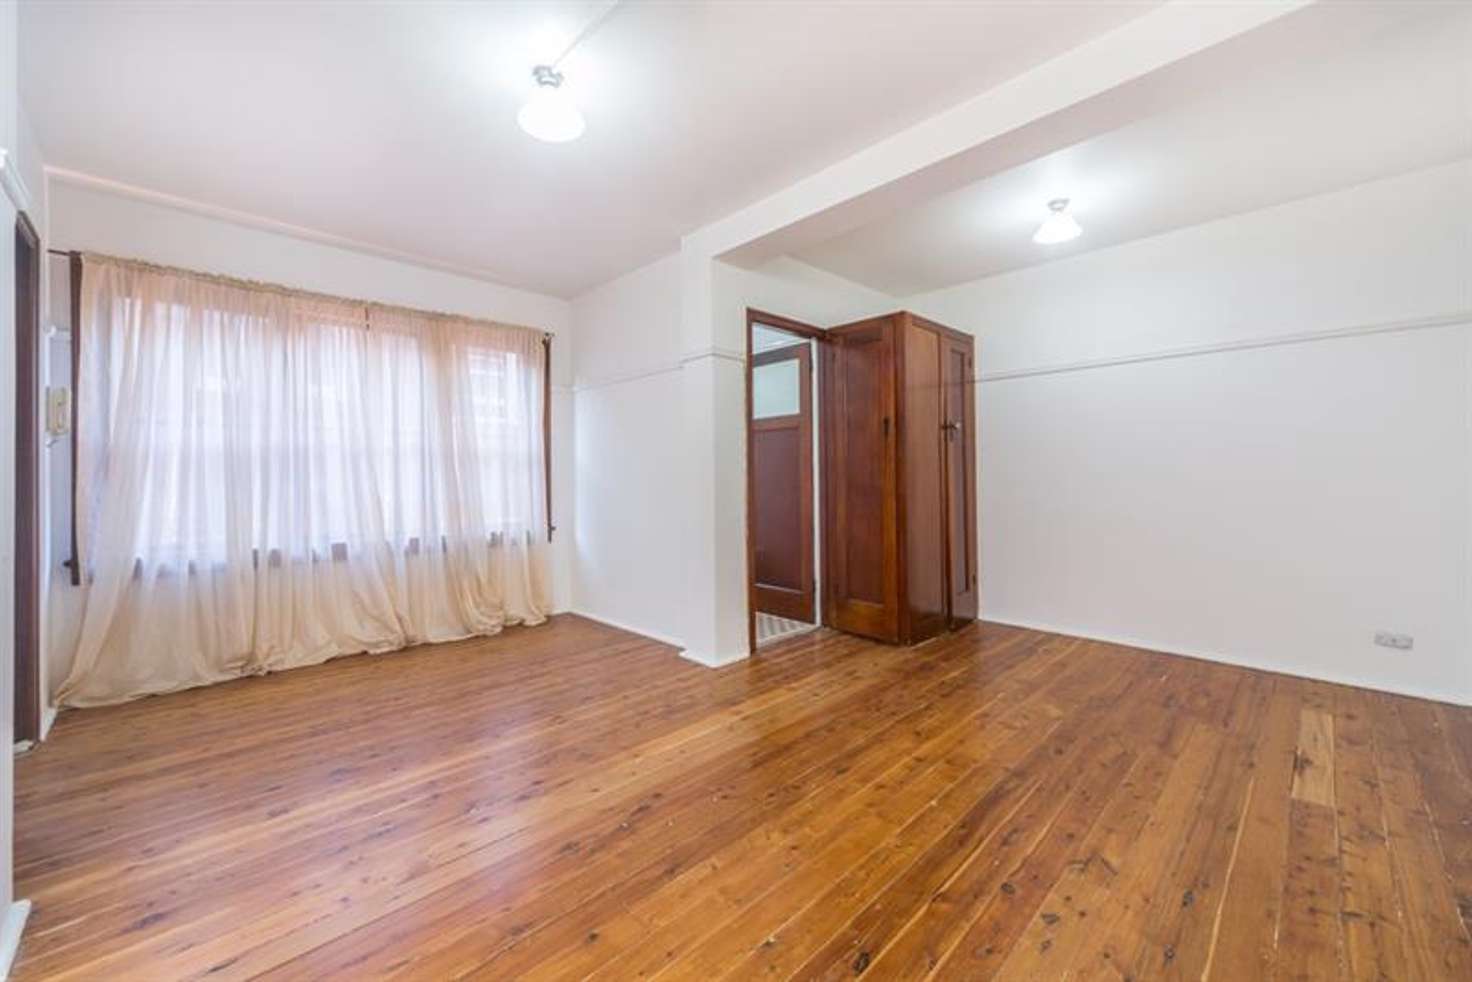 Main view of Homely studio listing, 27/64 Bayswater Rd, Rushcutters Bay NSW 2011